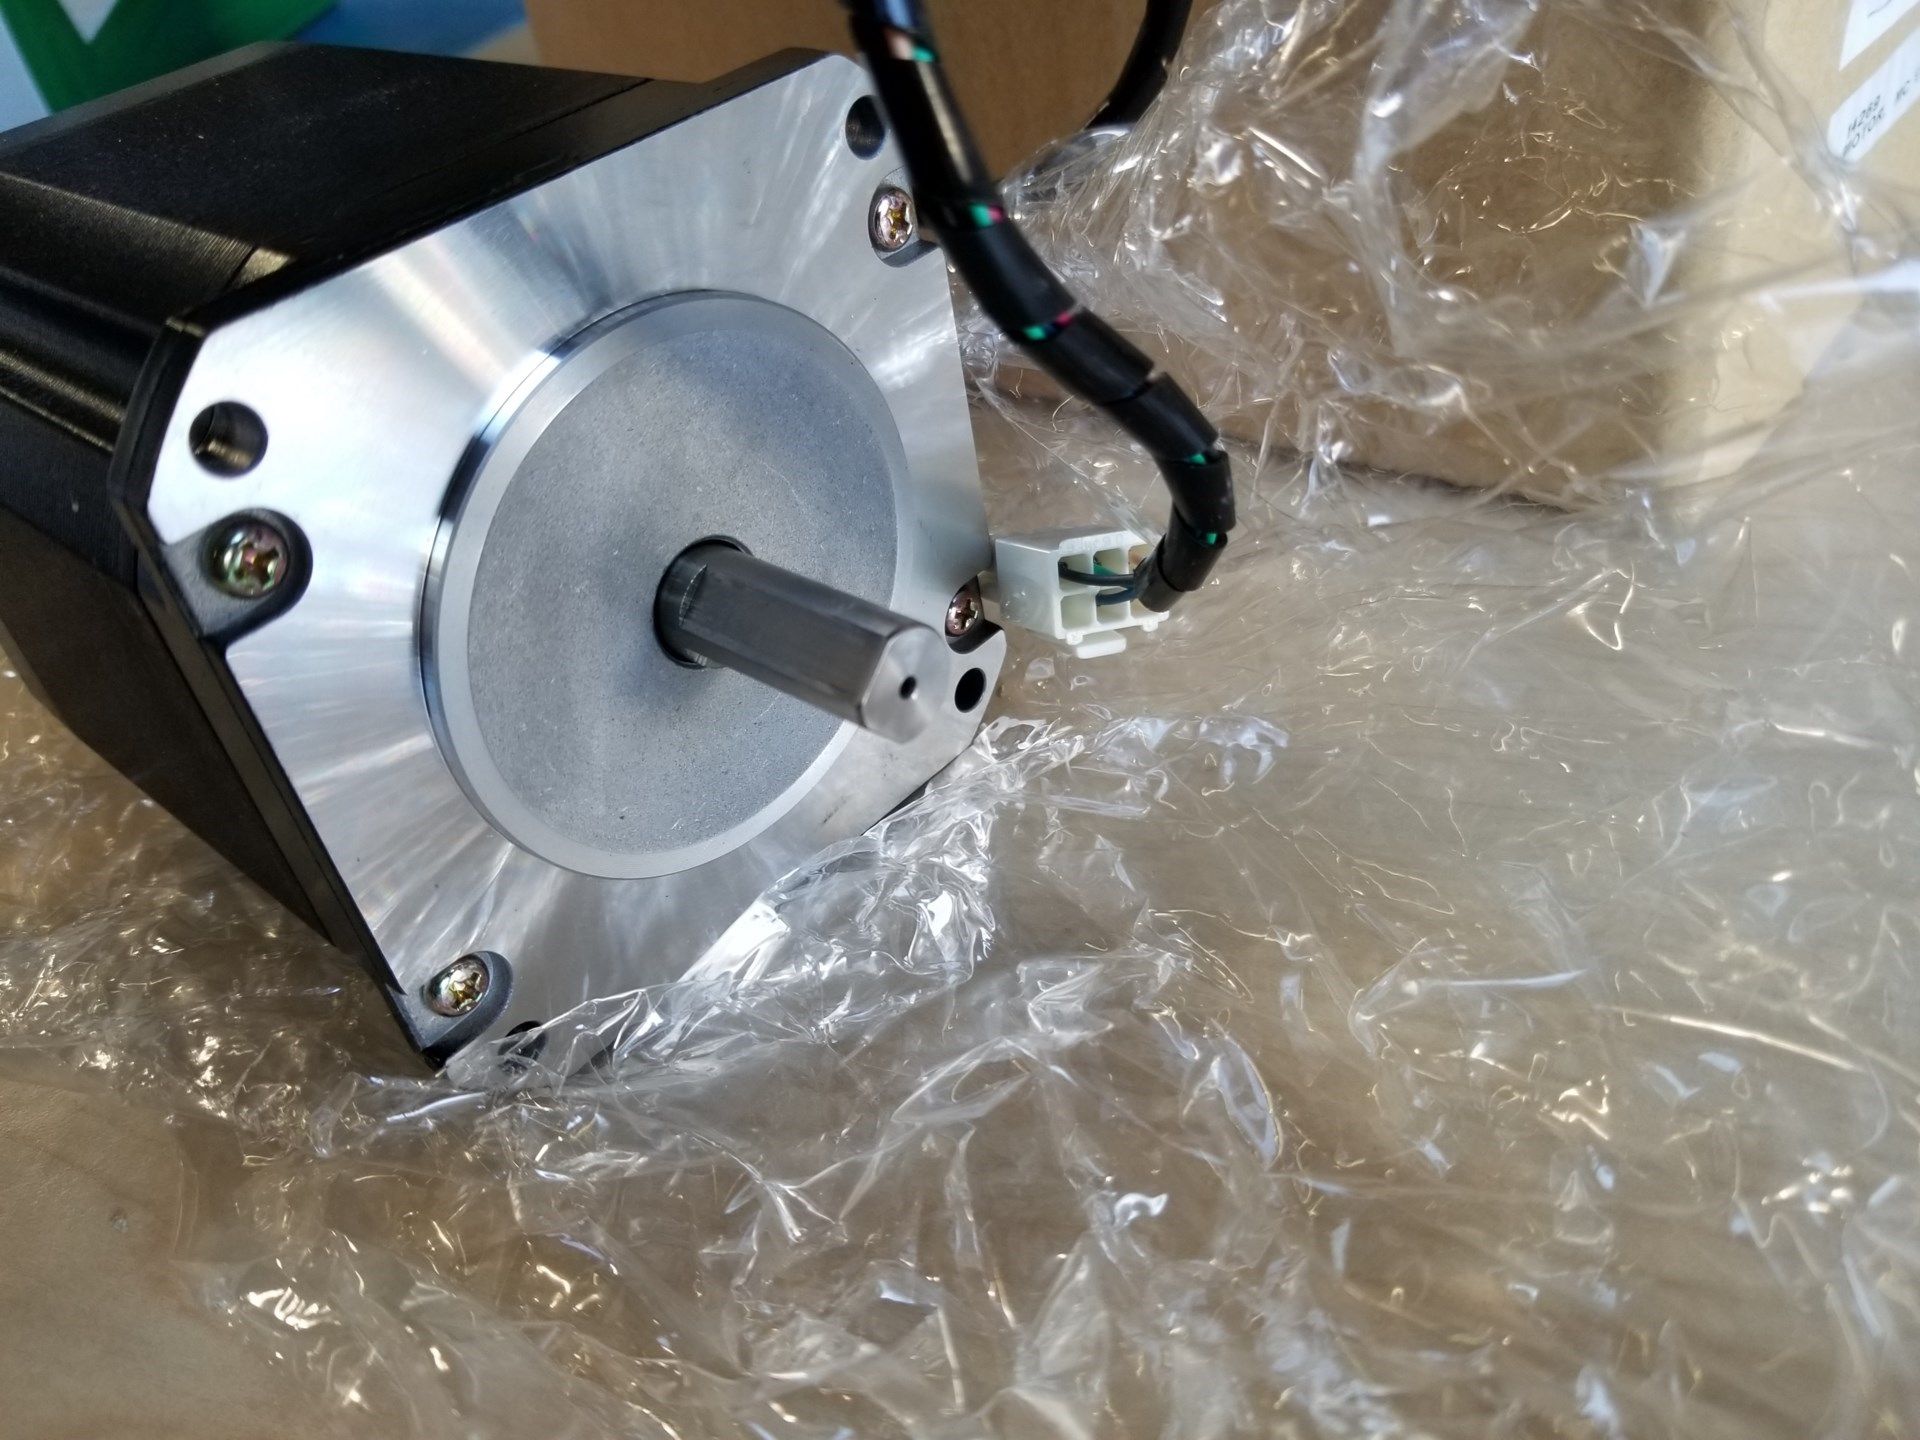 NEW MICRO STEP 5 PHASE STEPPER STEPPING MOTOR - Image 4 of 5